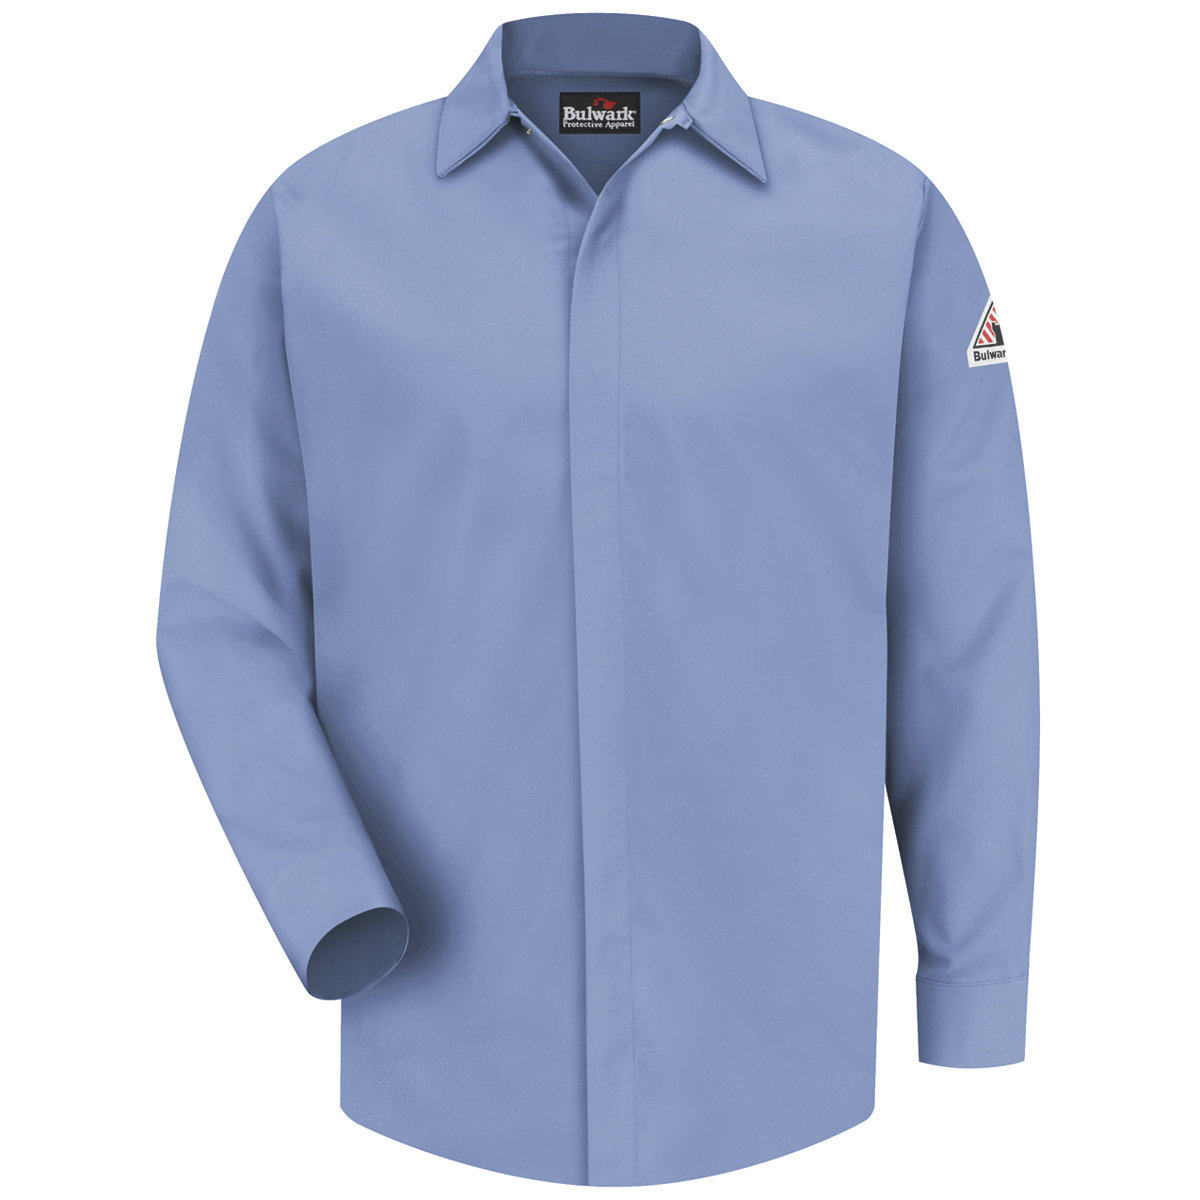 Bulwark® Large Tall Light Blue Westex Ultrasoft®/Cotton/Nylon Flame Resistant Work Shirt With Gripper Front Closure